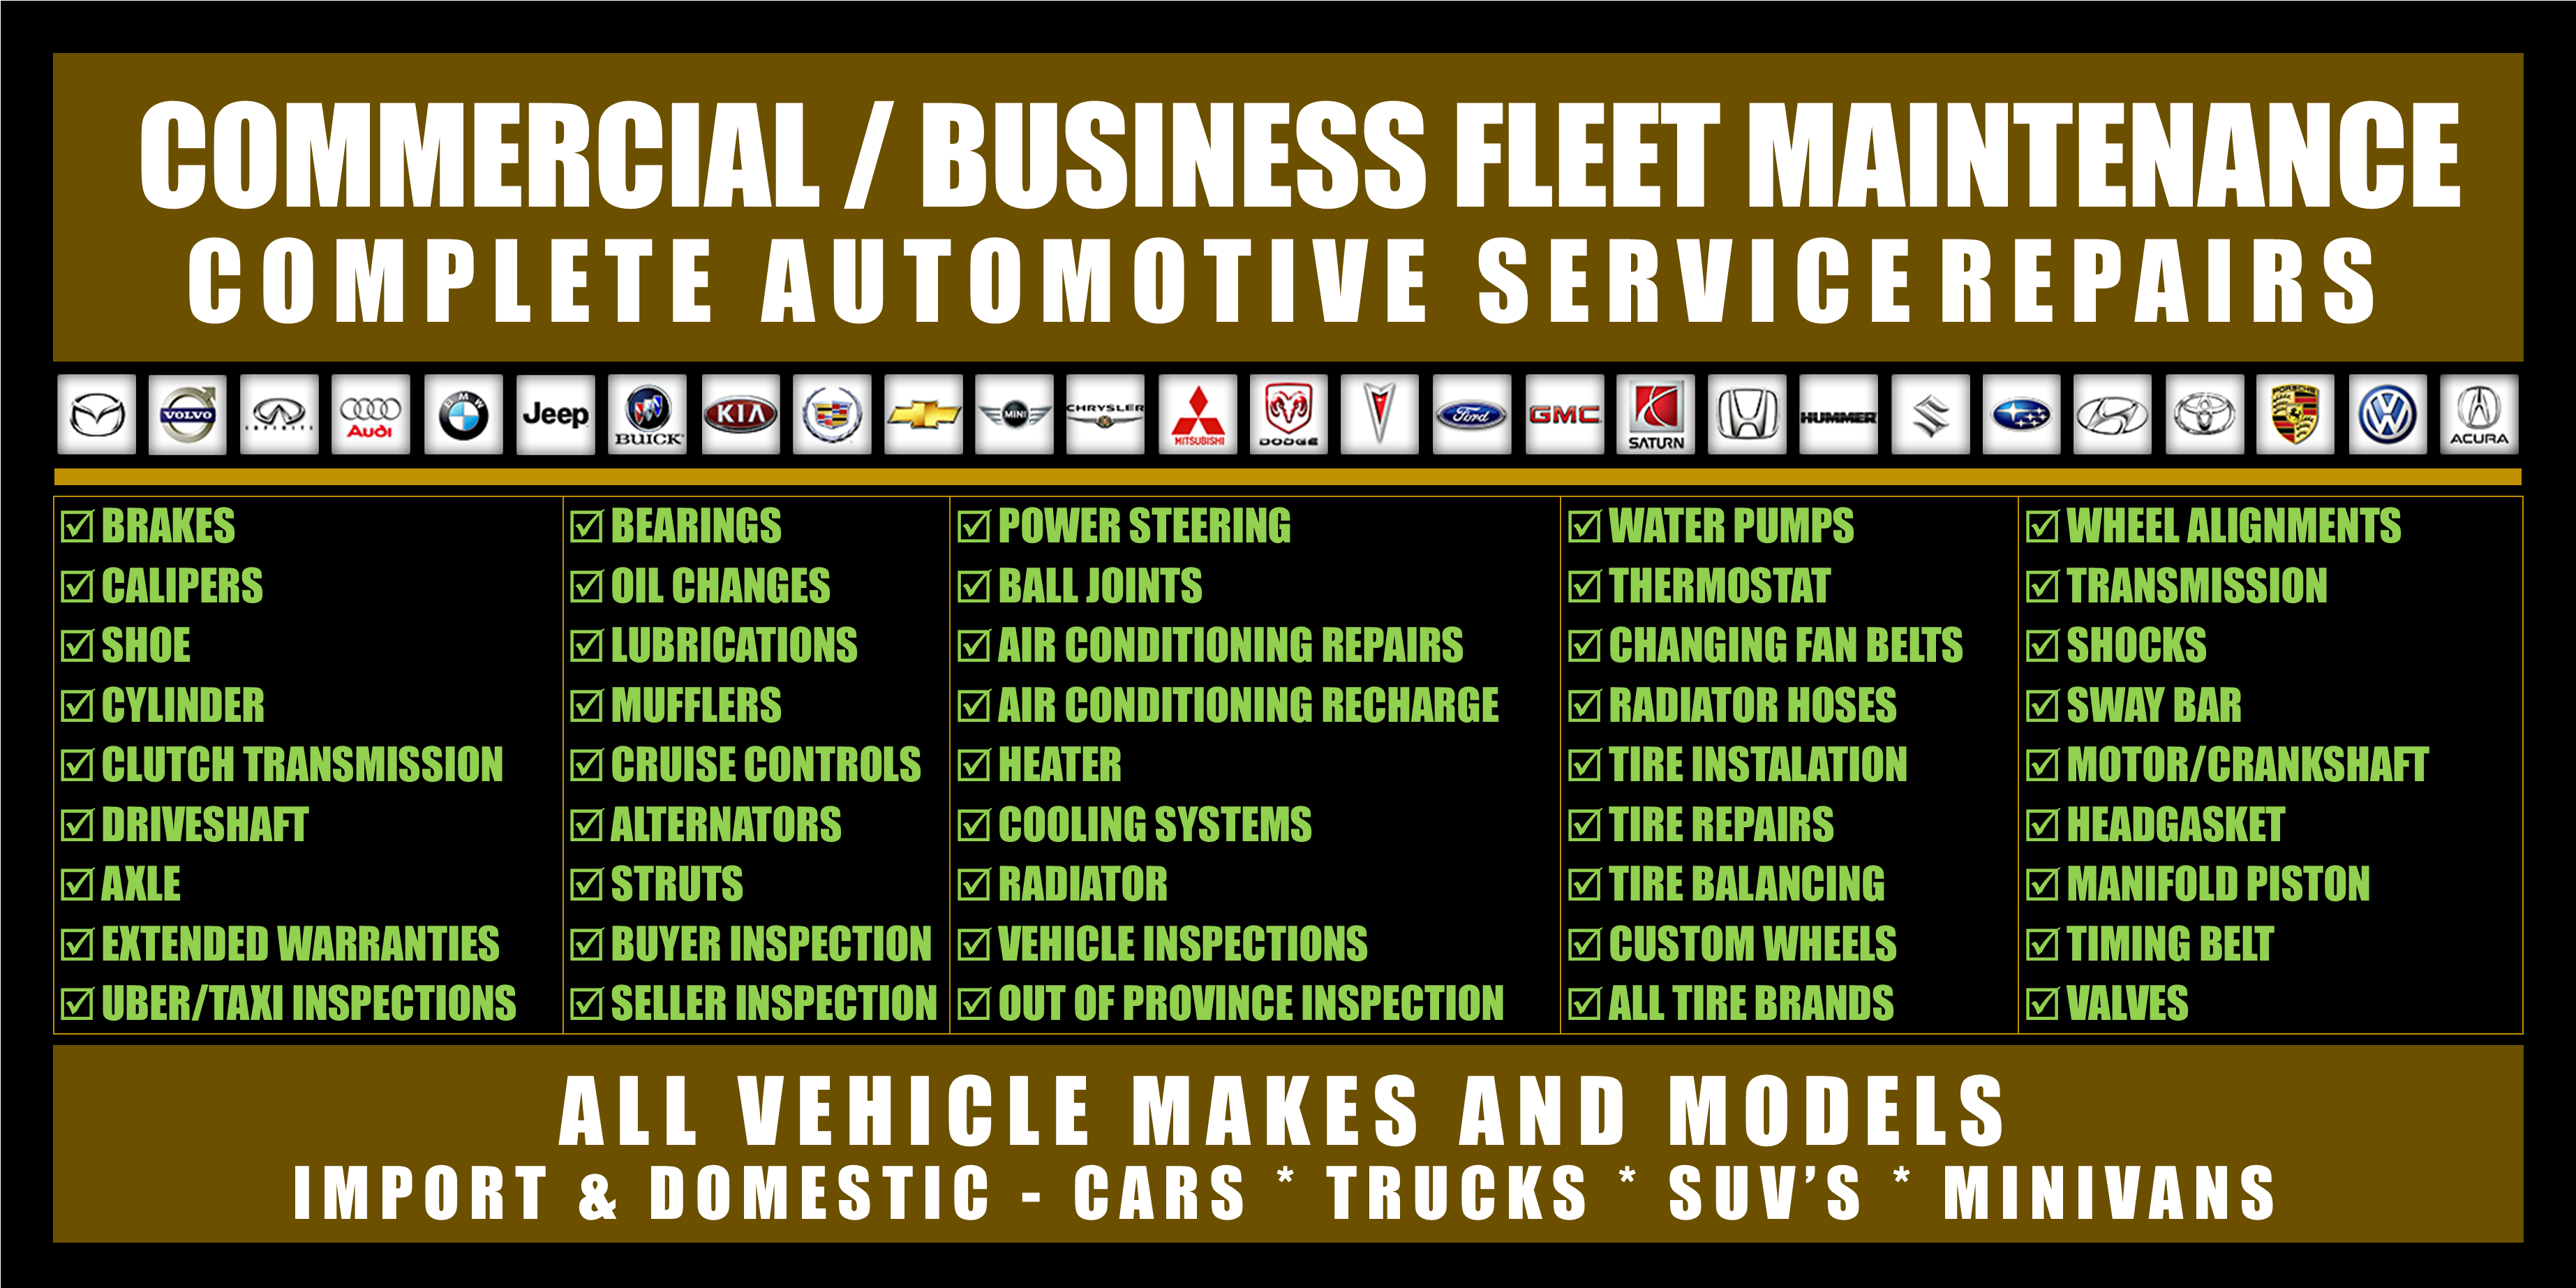 We Service all vehicle makes and models